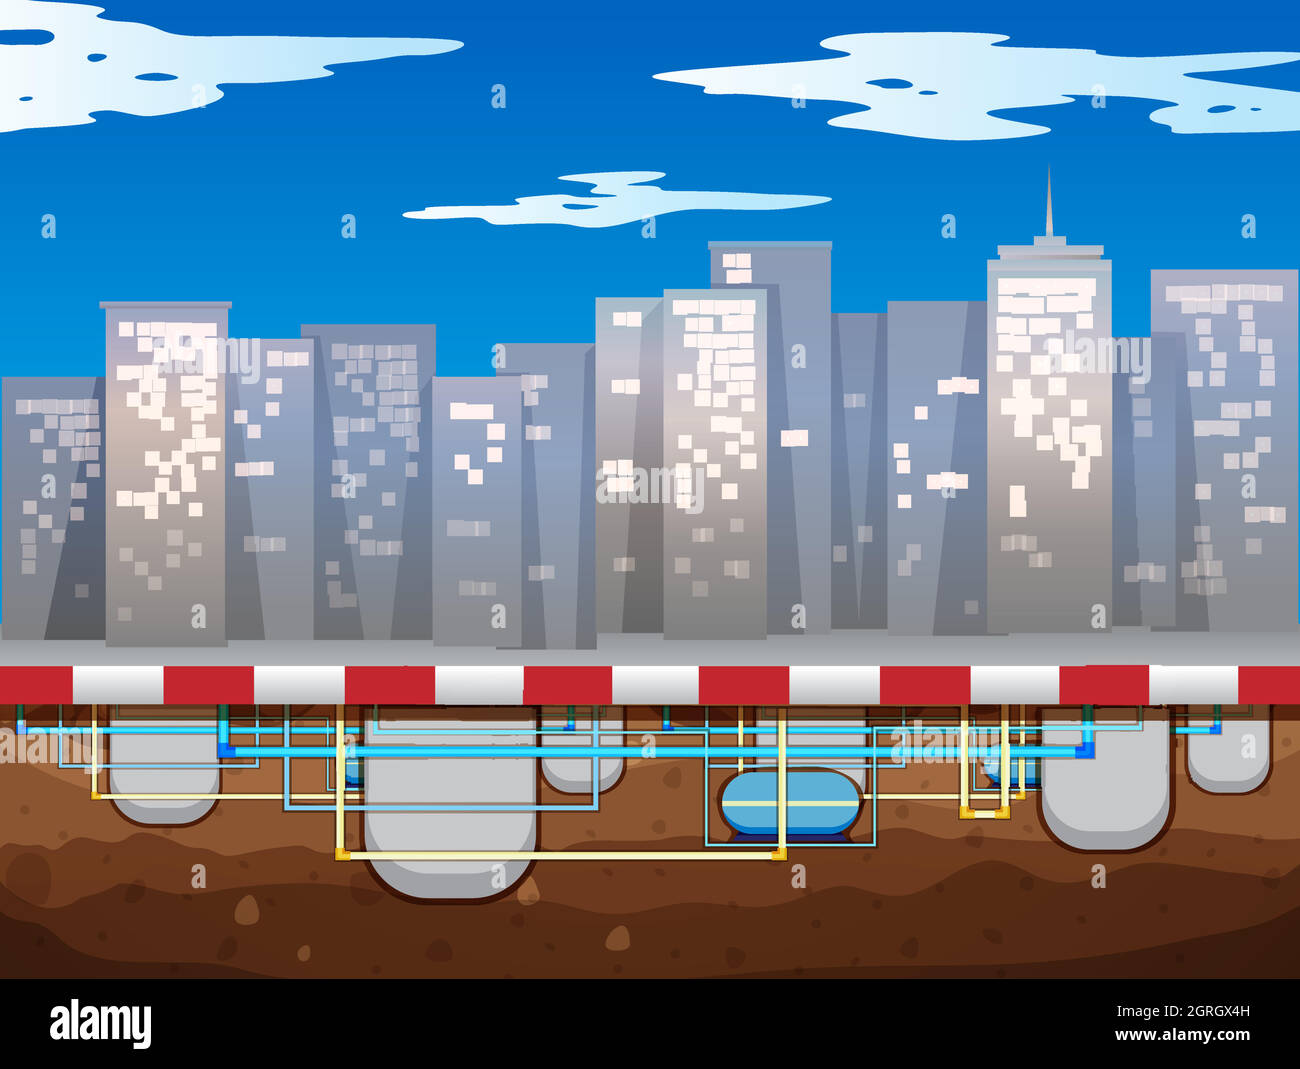 Water pipe underground of the city Stock Vector